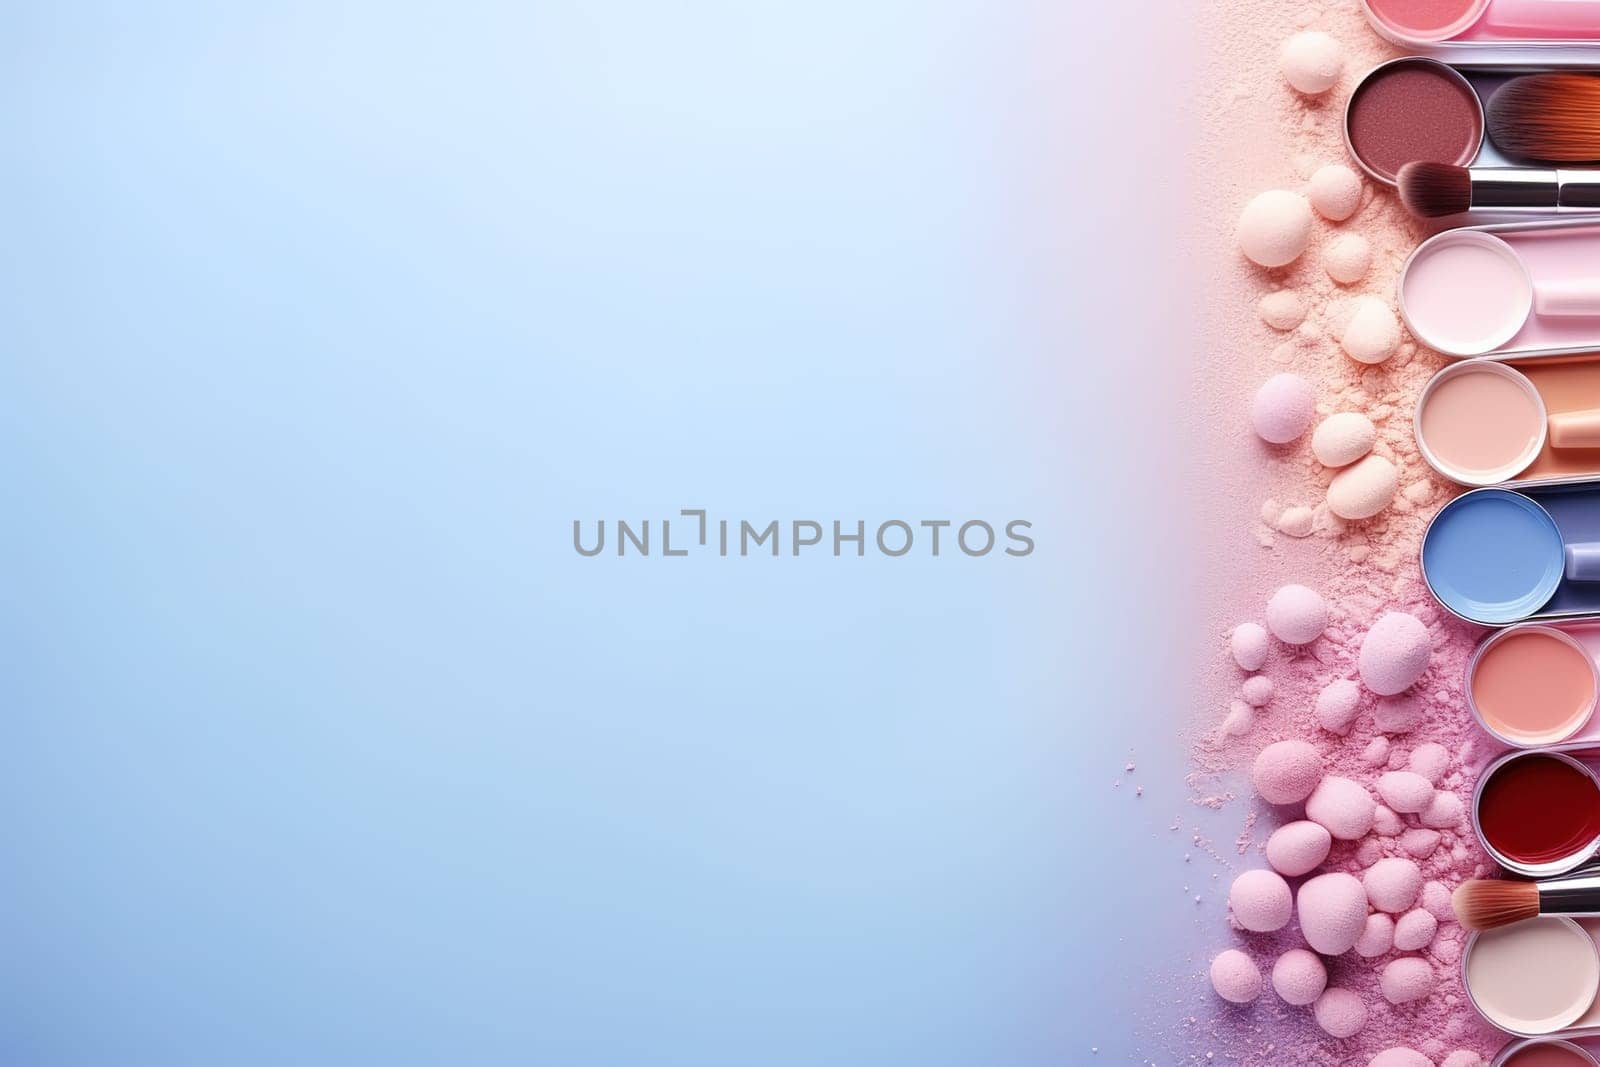 top view mockup cosmetic items with on copy-space pastel colored table